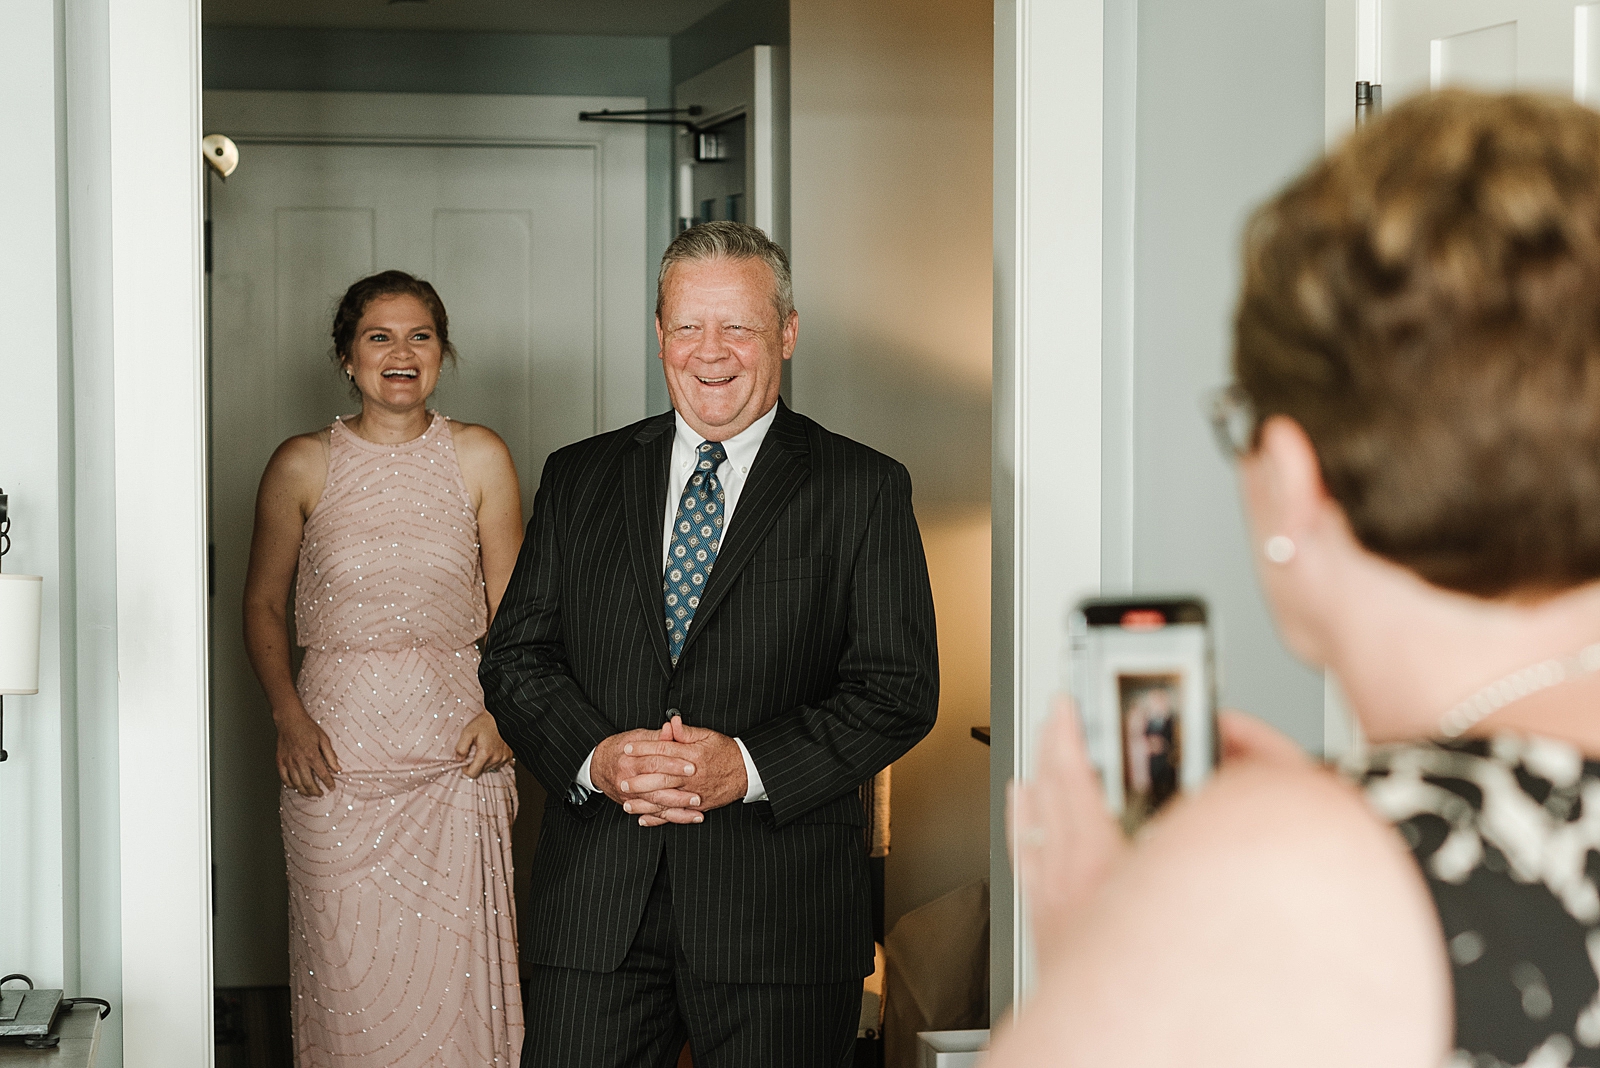 Getting Ready at Beauport Hotel in Glocuester, MA before Micro Wedding by Boston Wedding Photographer Annmarie Swift